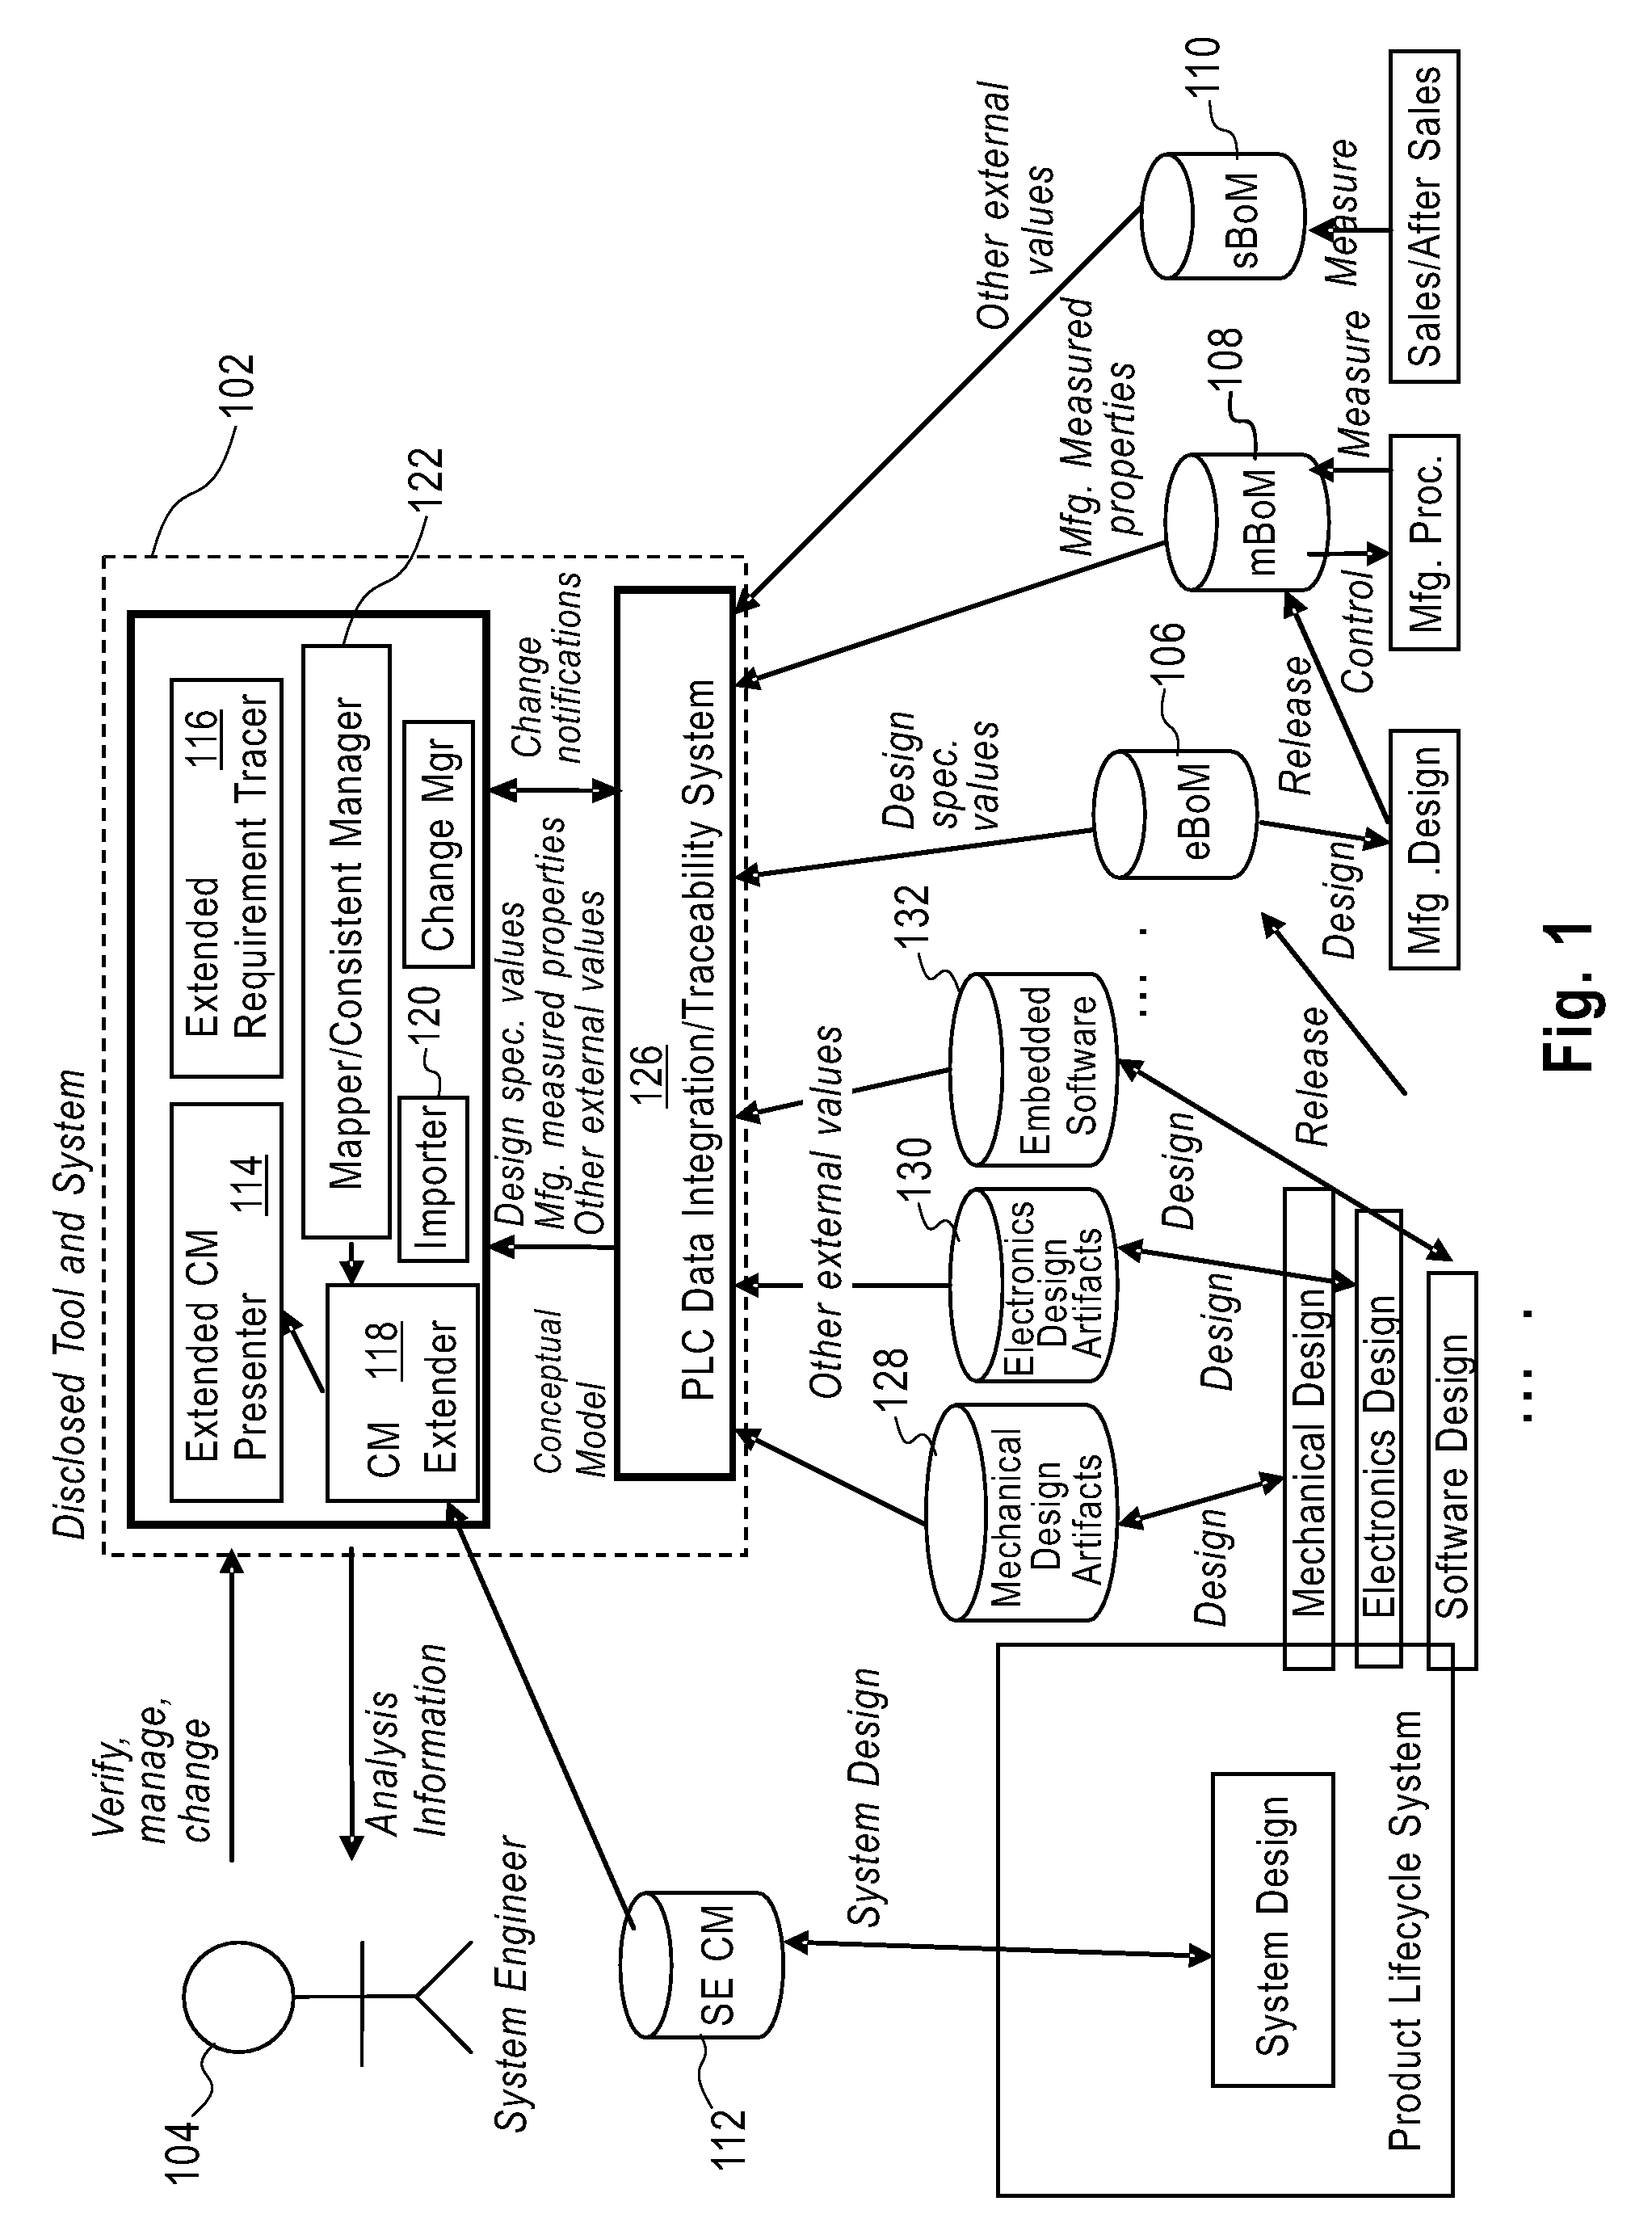 Method and apparatus for using design specifications and measurements on manufactured products in conceptual design models